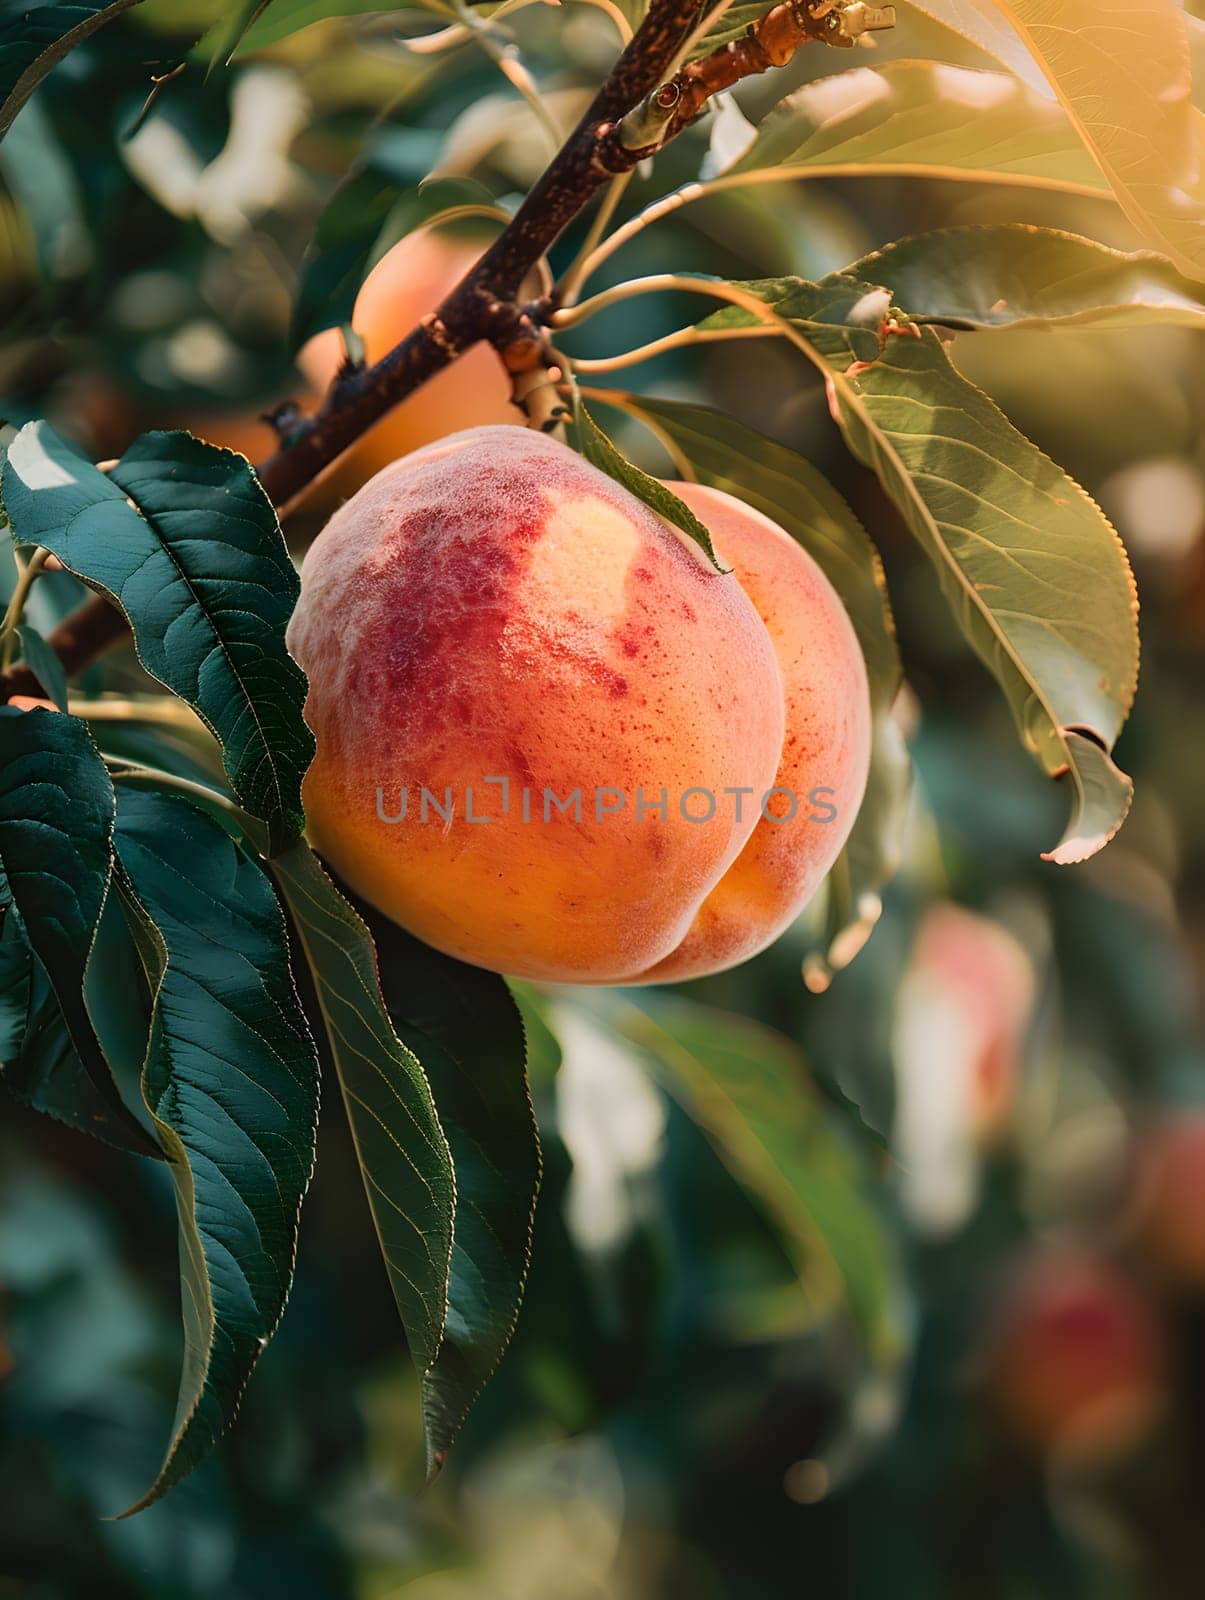 A closeup photo of a ripe peach hanging from a tree branch, showcasing the natural beauty of this delicious fruit variety